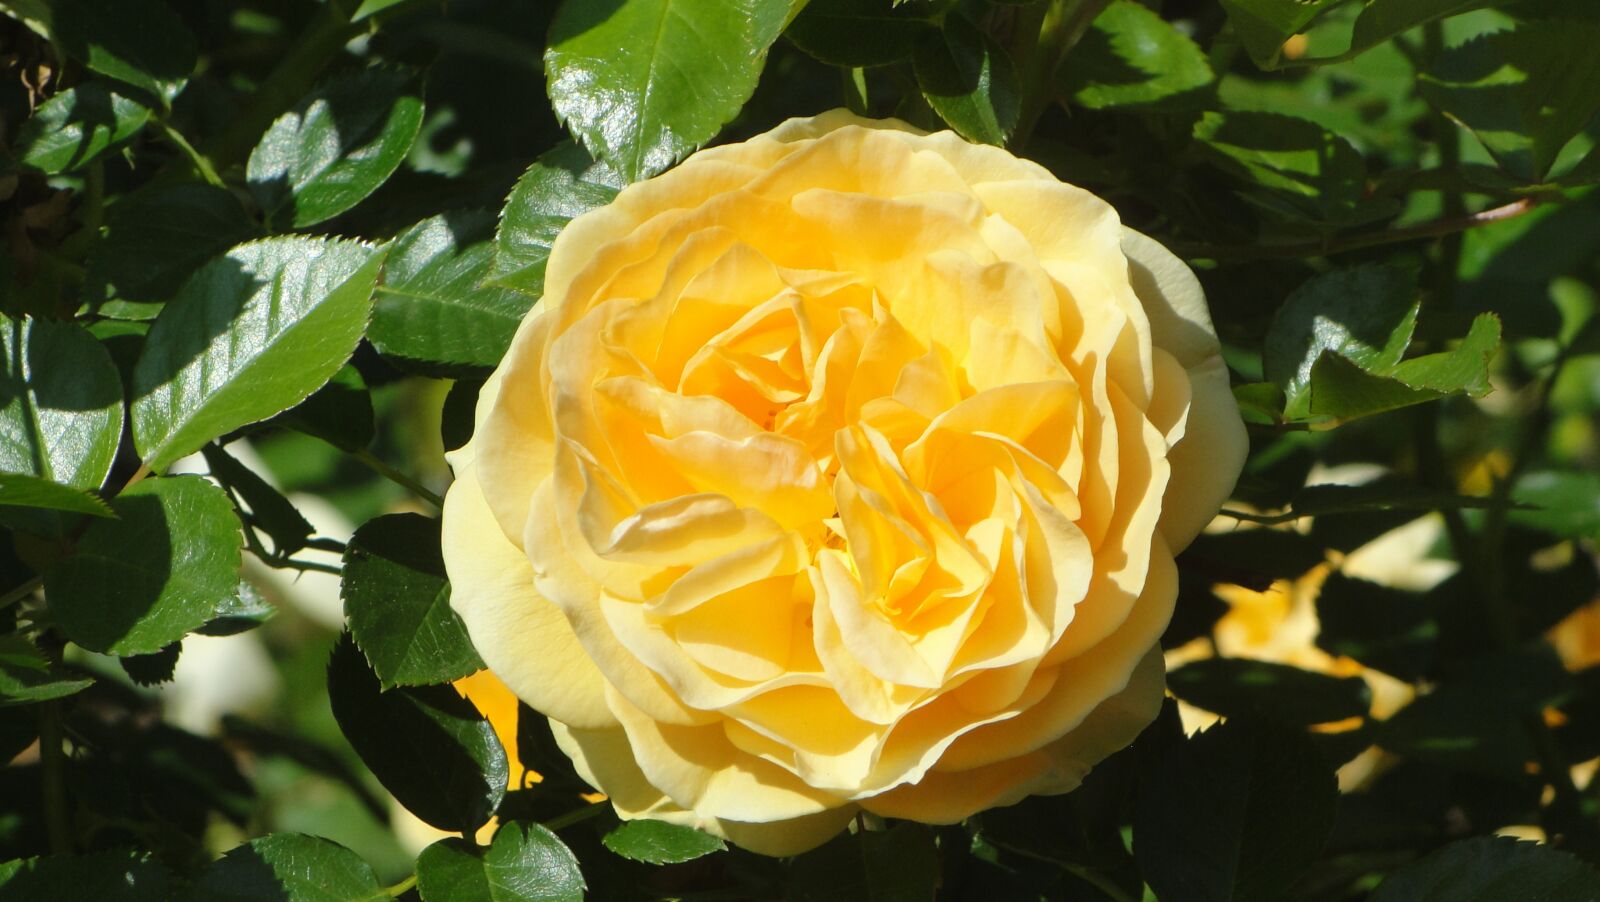 Sony Cyber-shot DSC-H20 sample photo. Yellow rose, rose, nature photography